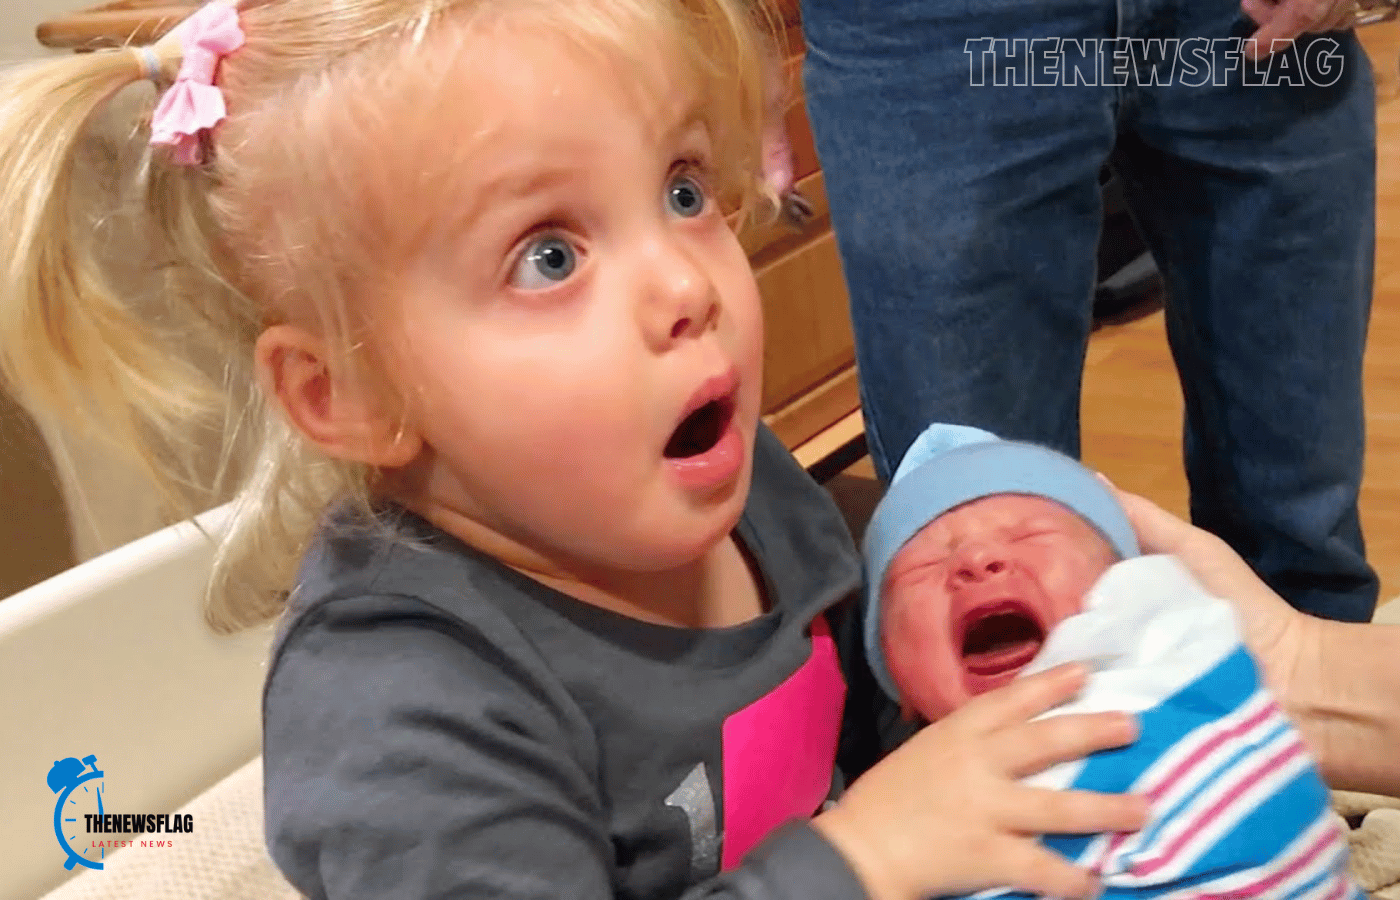 The 10-Year-Old Girl's Endearing Response Upon Seeing Her Newborn Sibling